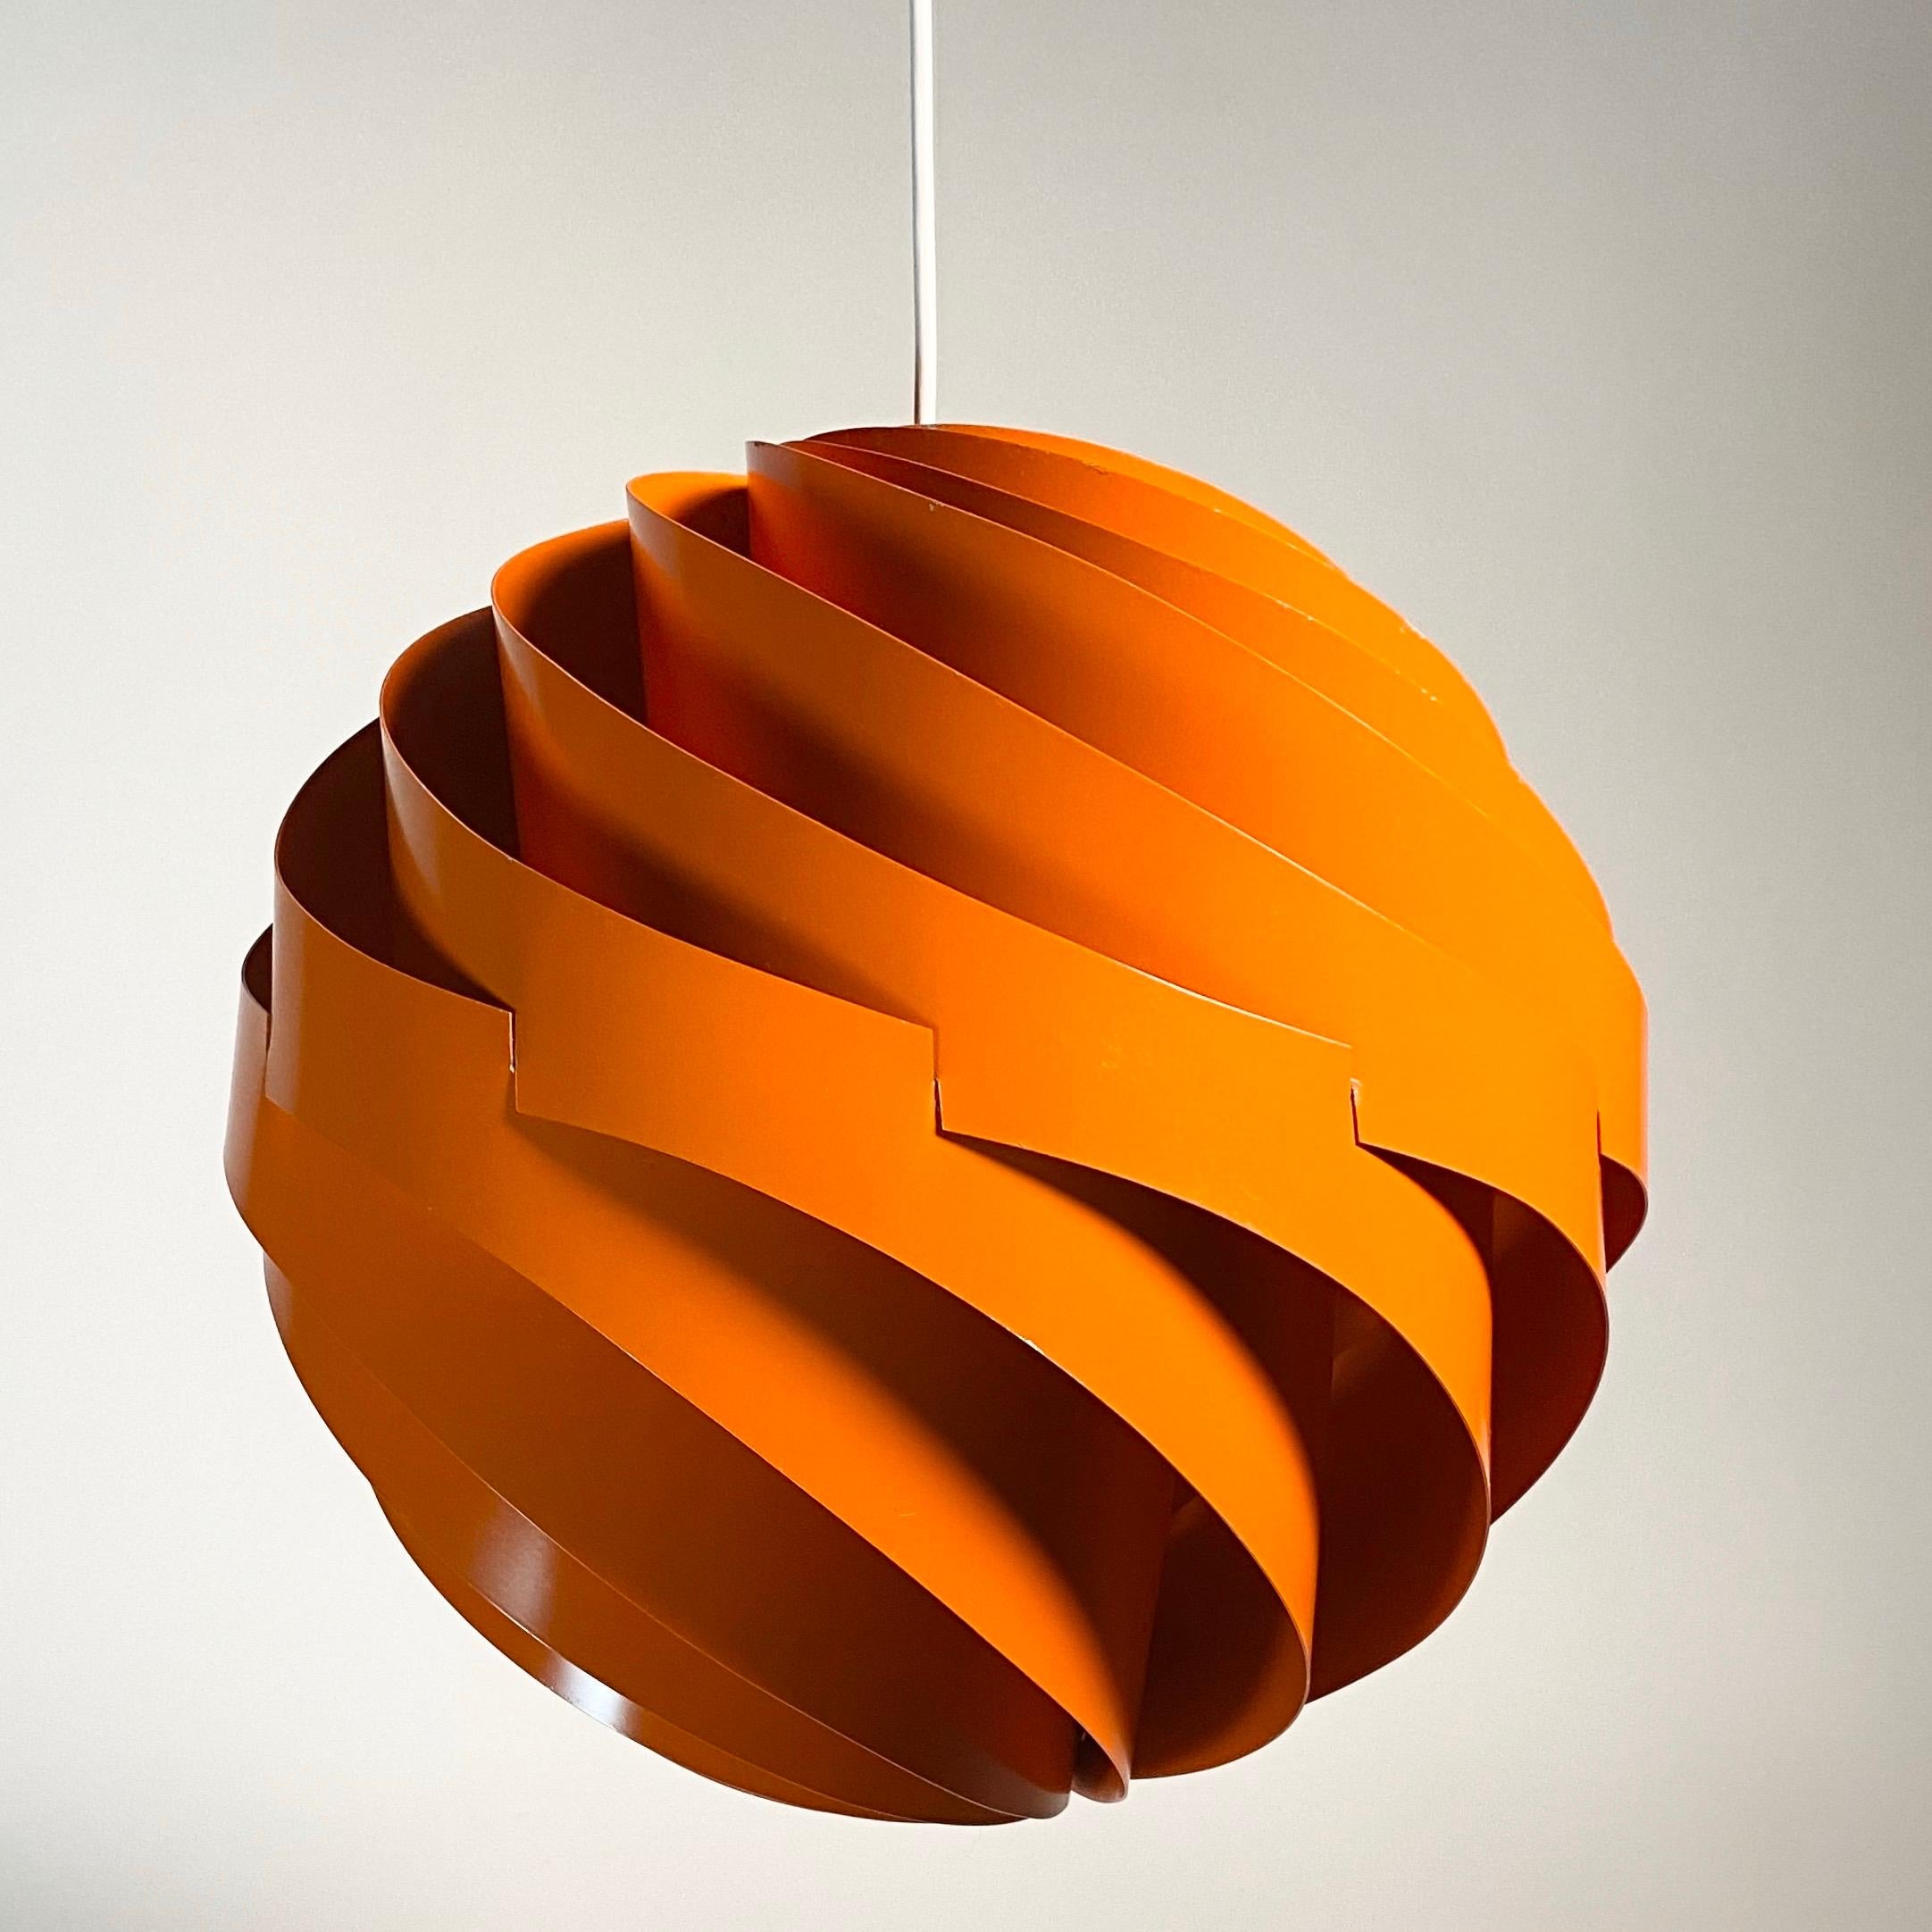 Simply one of the most beautiful design piece when talking about Danish designs from the midcentury era. Louis Weisdorf has owned respect for his engenious lighting designs all over the world and the Turbo is indeed no exception.

A real